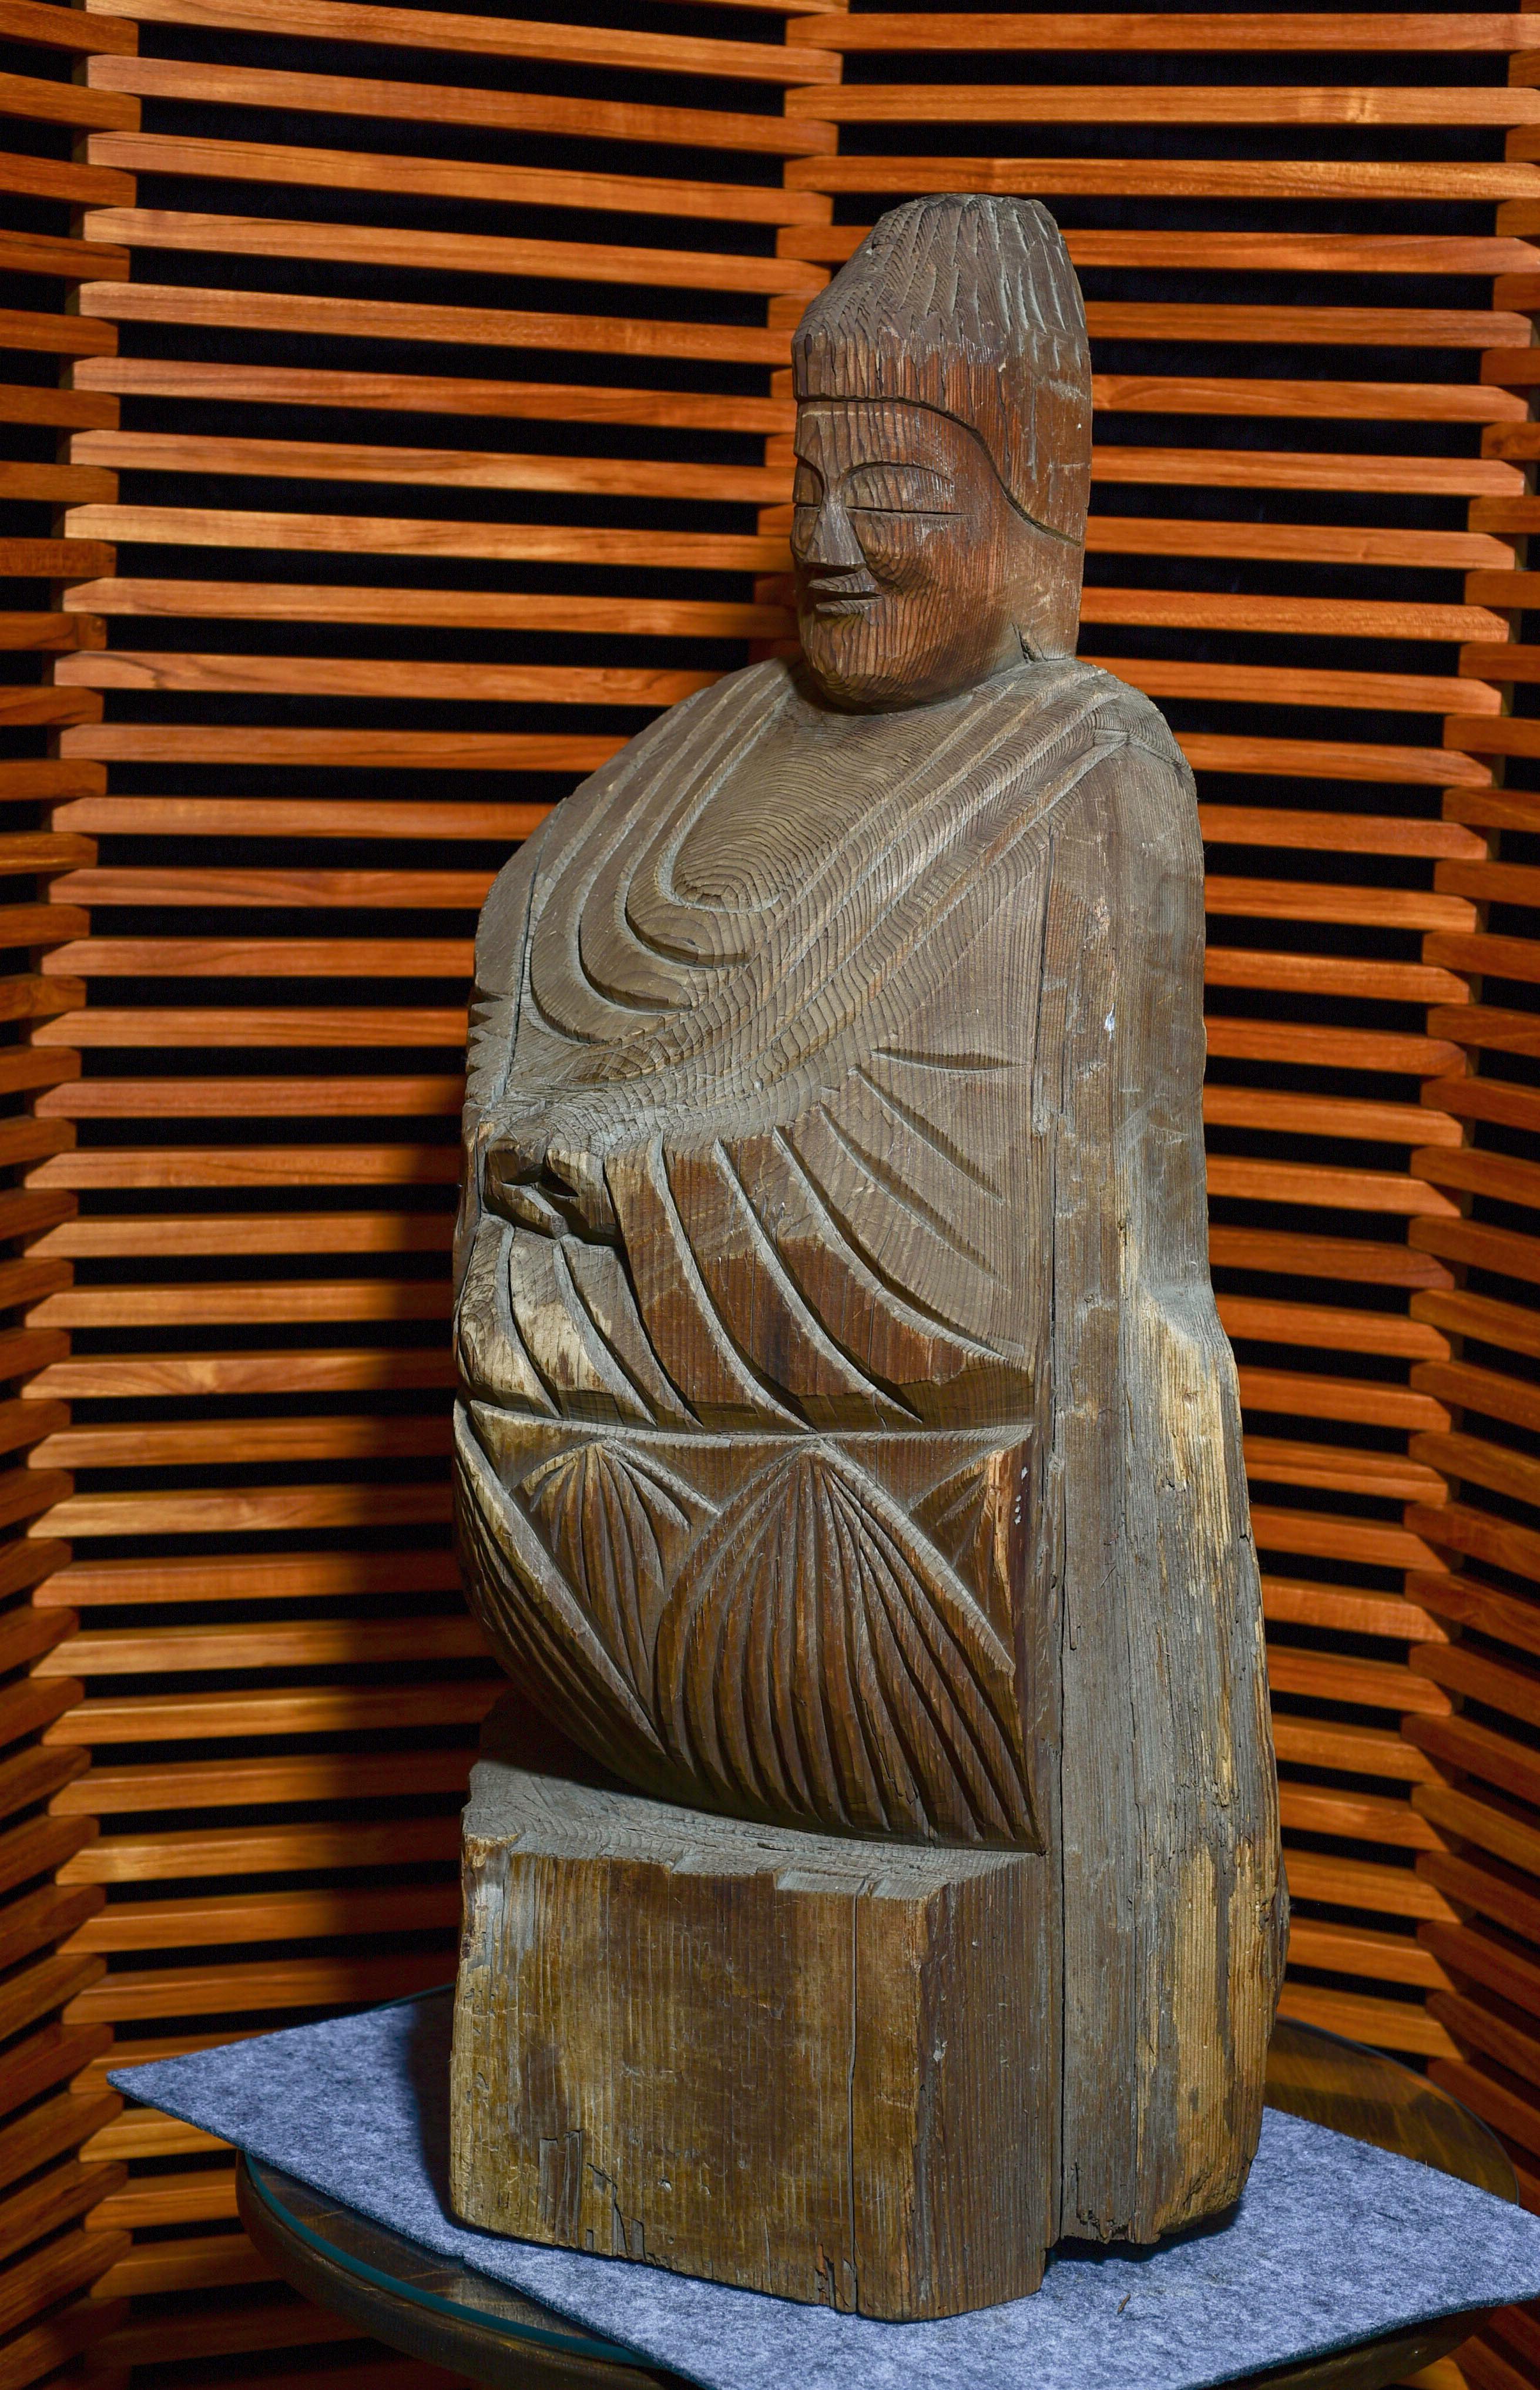 Life-size Carved Wood Buddha, possibly by the great 17thC Japanese carver Enku. One of the all-time greats, this piece has all of the qualities of one of his best (look online or at books of his sculpture-there are many). According to one reference